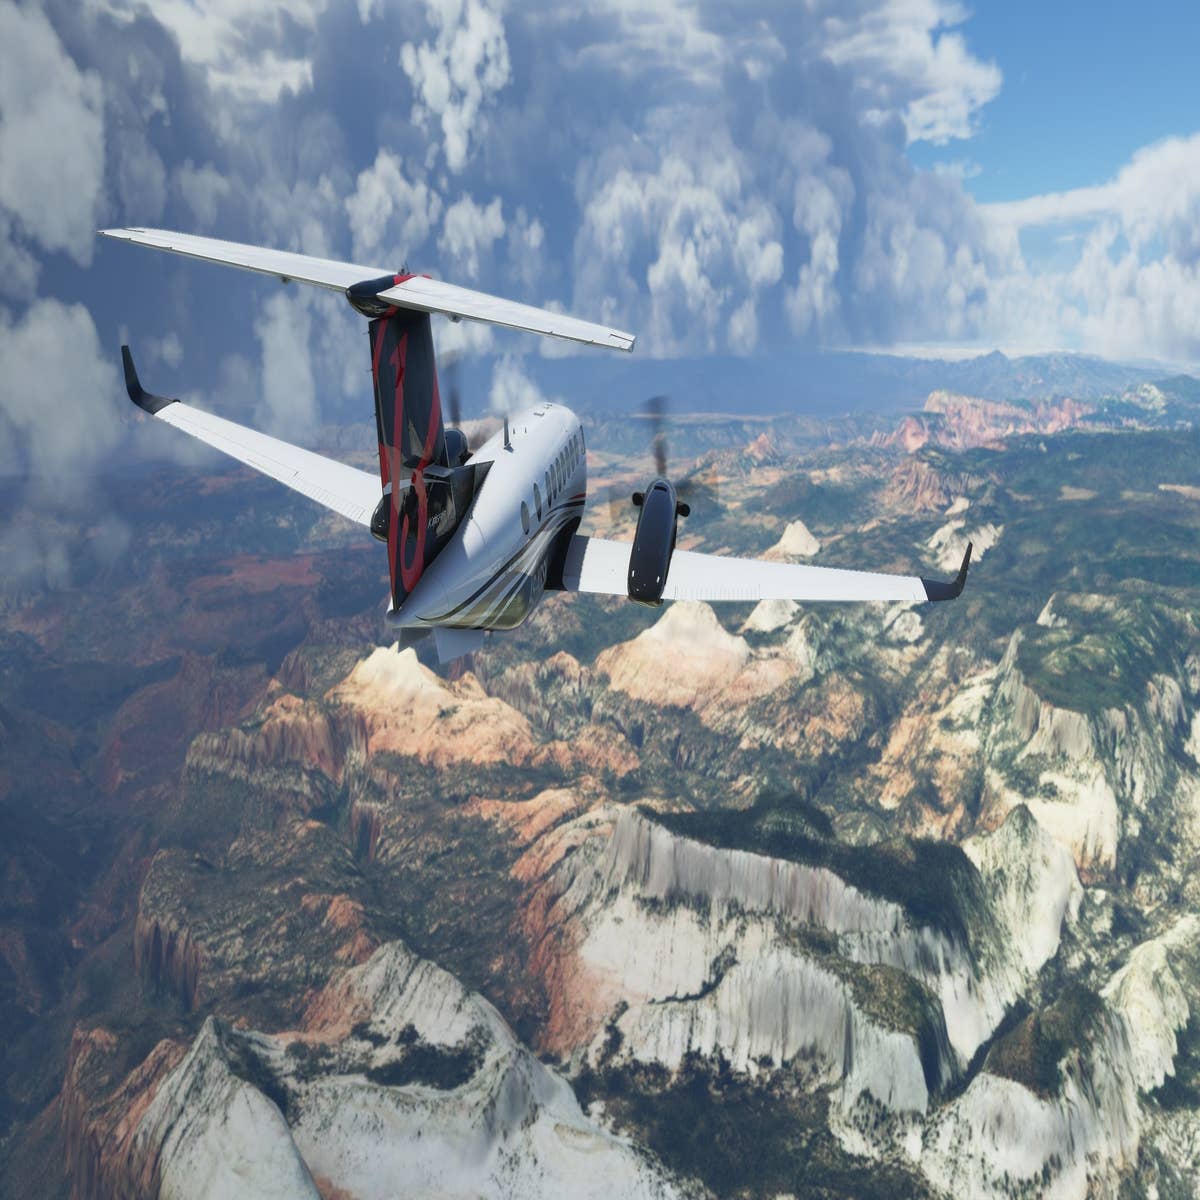 Flight Simulator 2020 is the most fun I've ever had in the sky